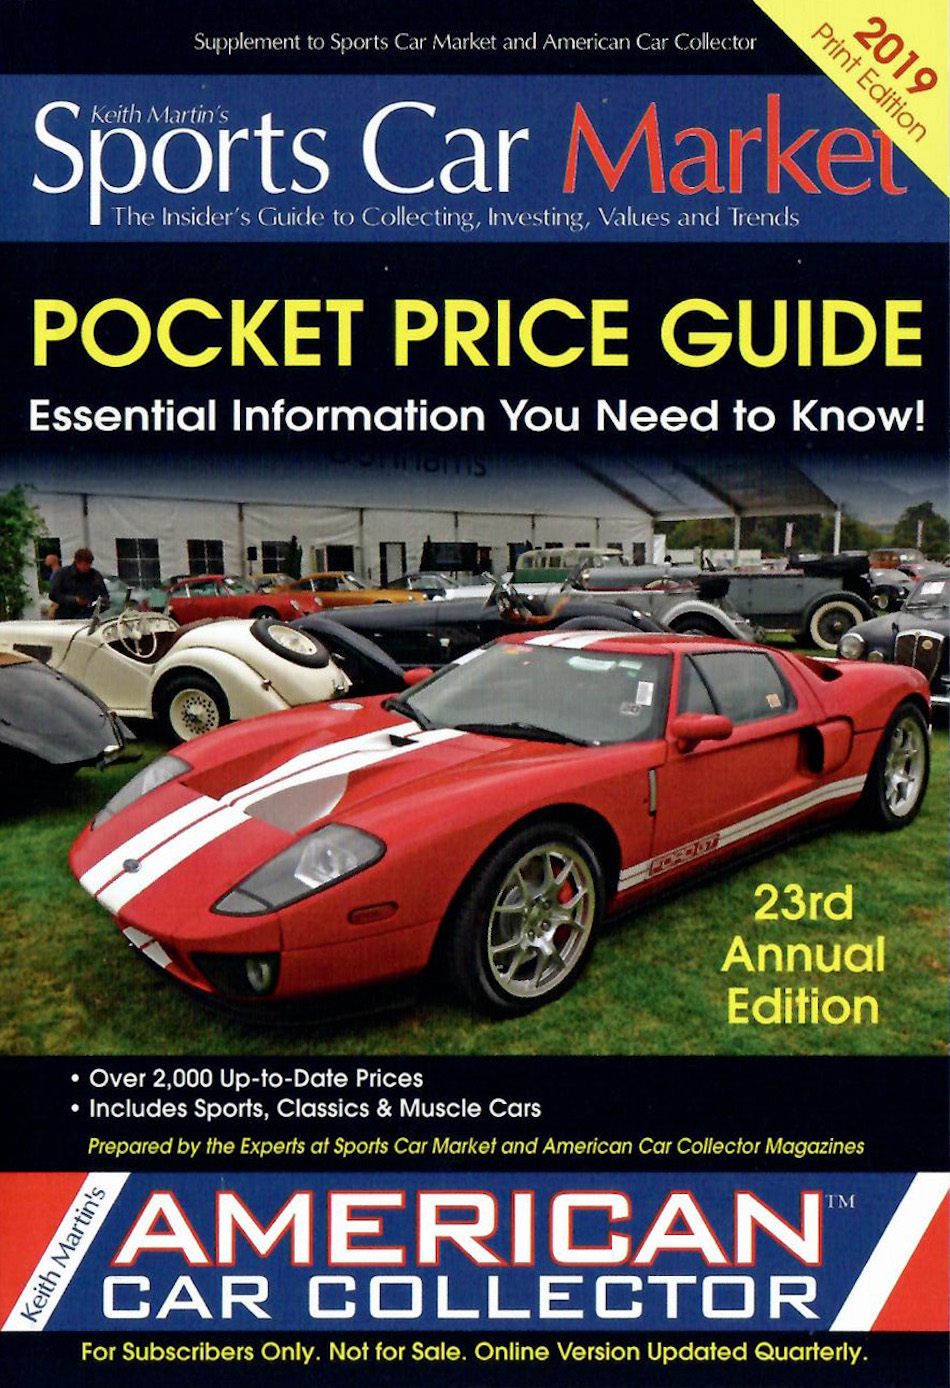 The 2019 Sports Car Market Pocket Price Guide